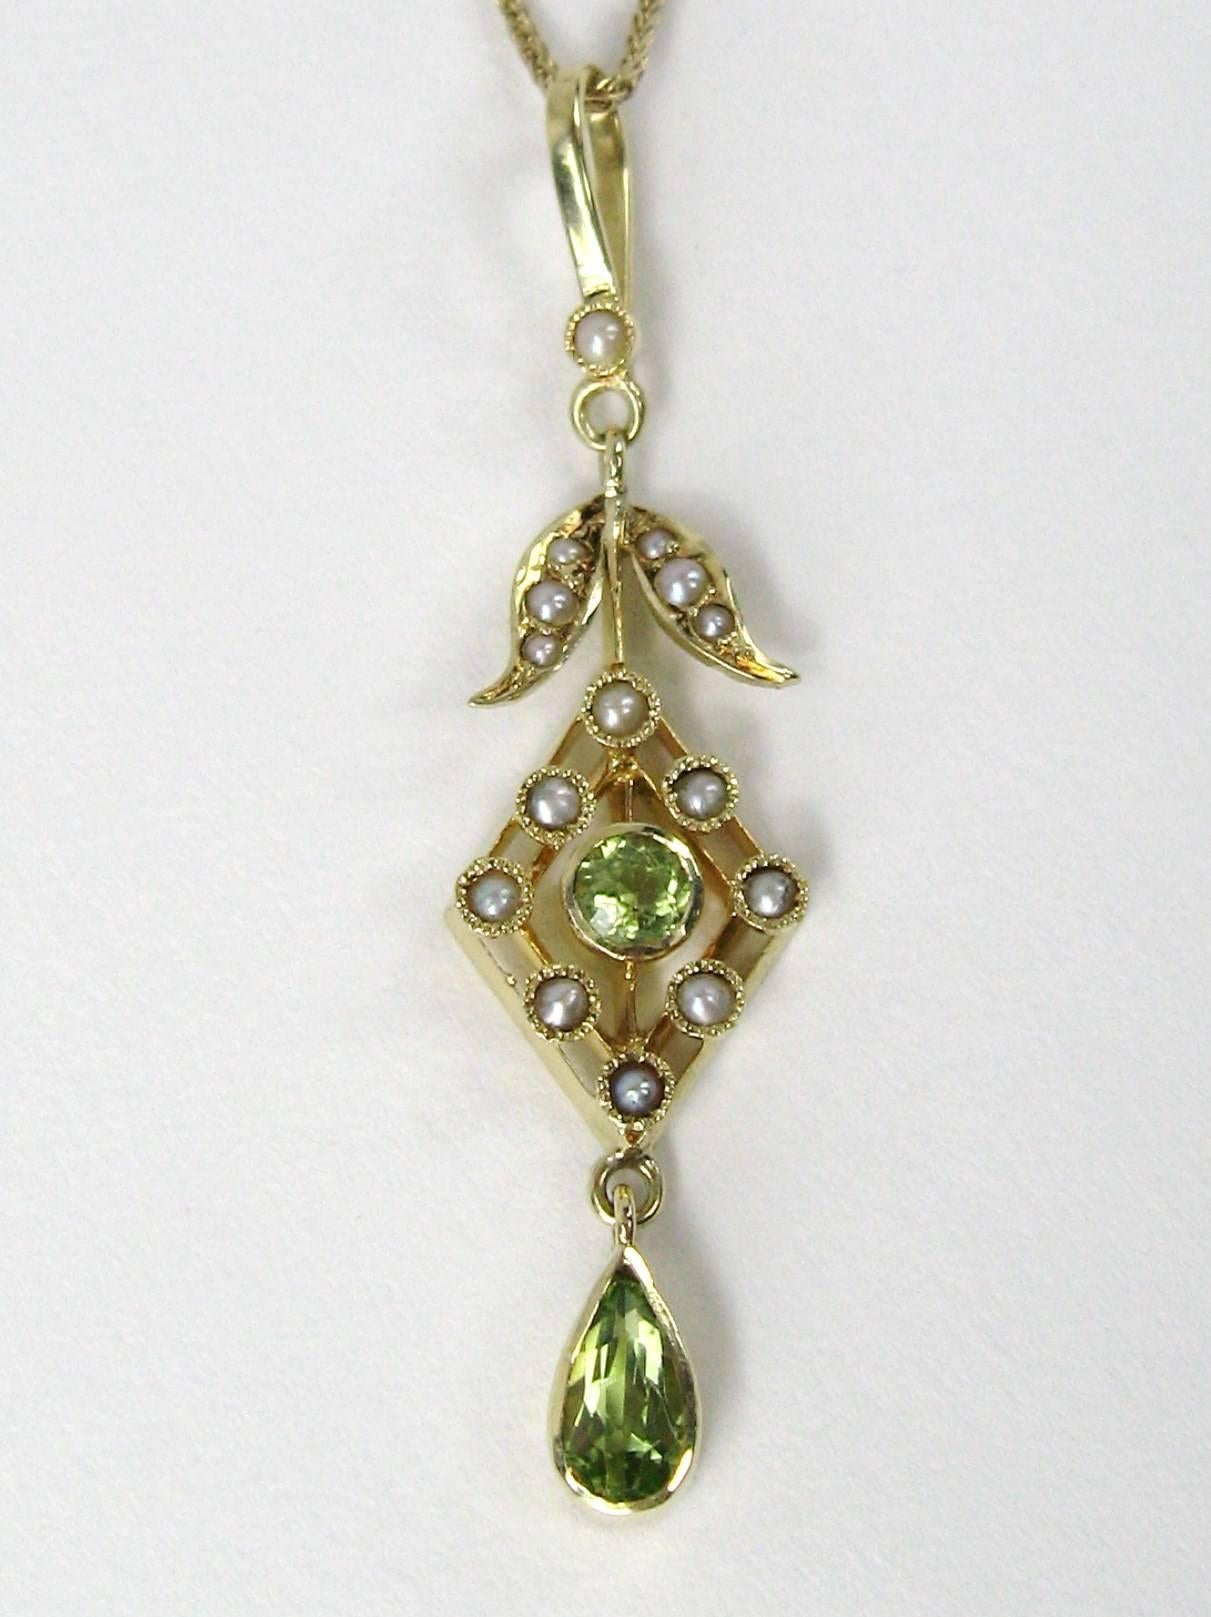 Delicate in its design, this stunning 14K gold Lavalier is a show stopper. Floral design with bezel set seed pearl and Peridot. Pendant measures - 1 13/16 in top to bottom x 5/16 in at its widest - Chain is 18 in long. This is out of a massive